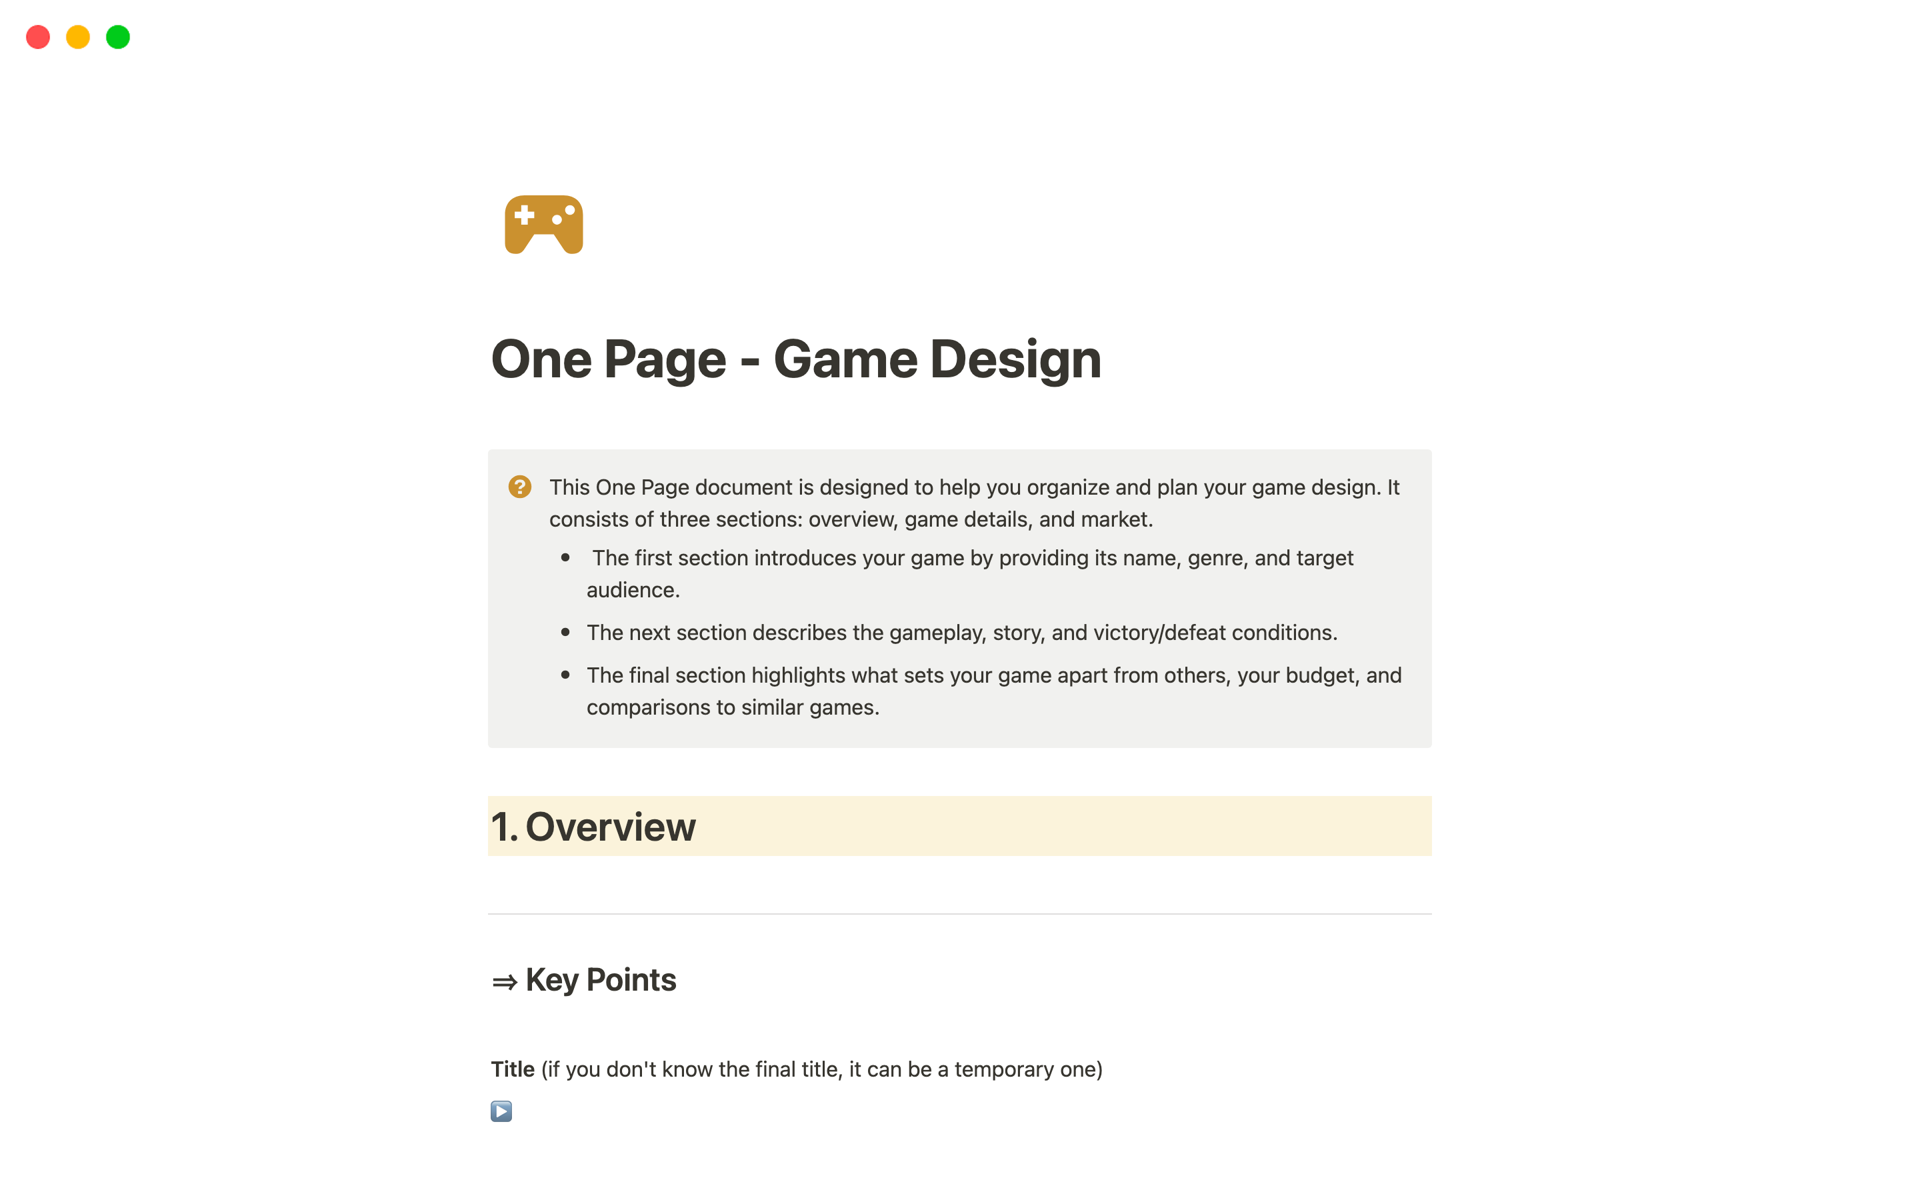 A One Page document designed to help you organize and plan your game design.